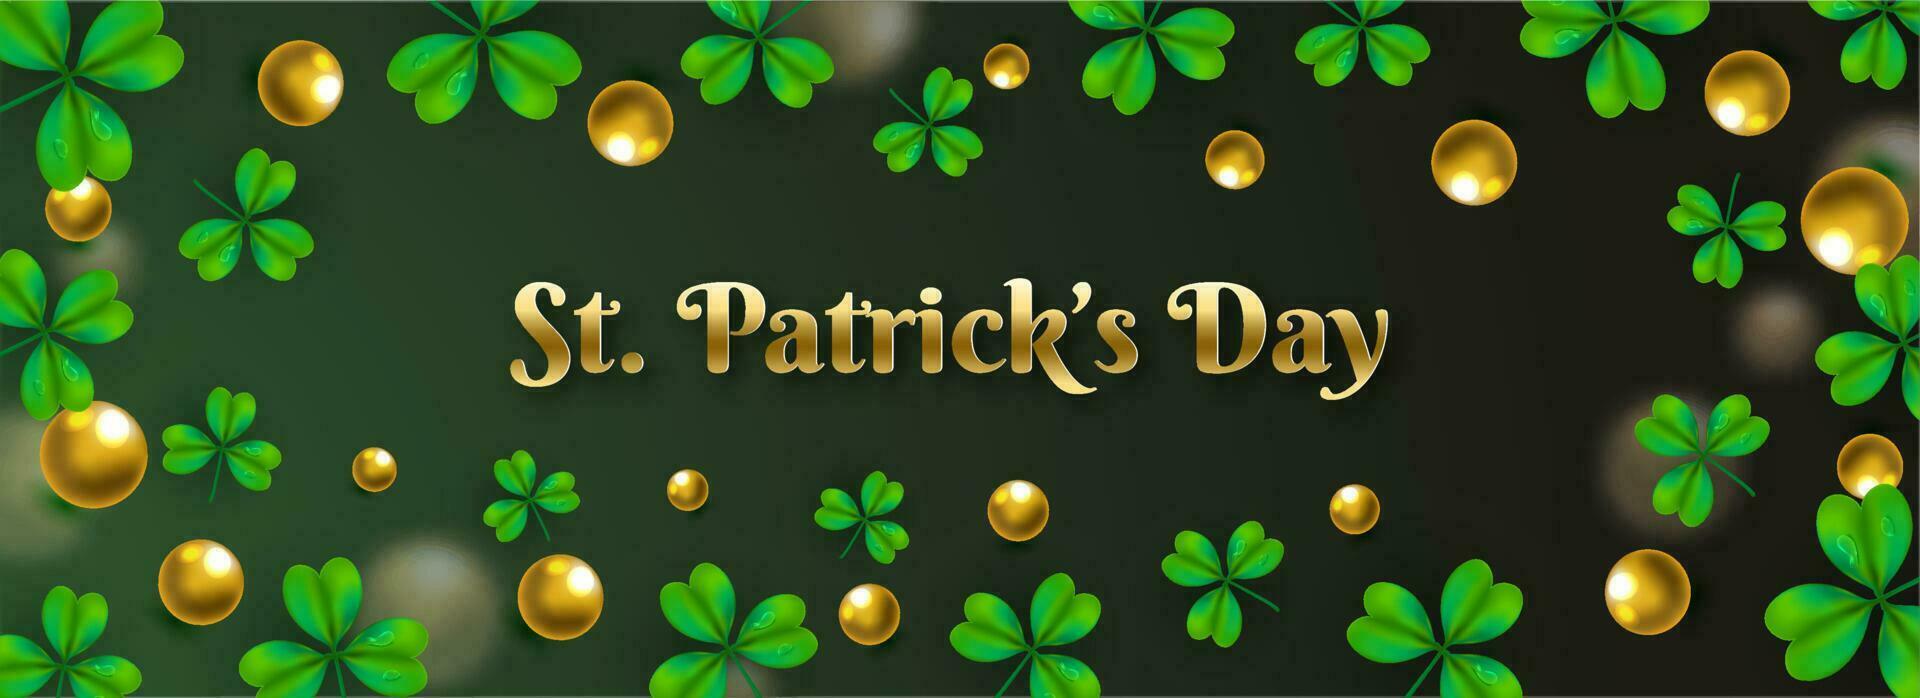 St. Patrick's Day header or banner design decorated with clover leaves and golden pearls on green background. vector